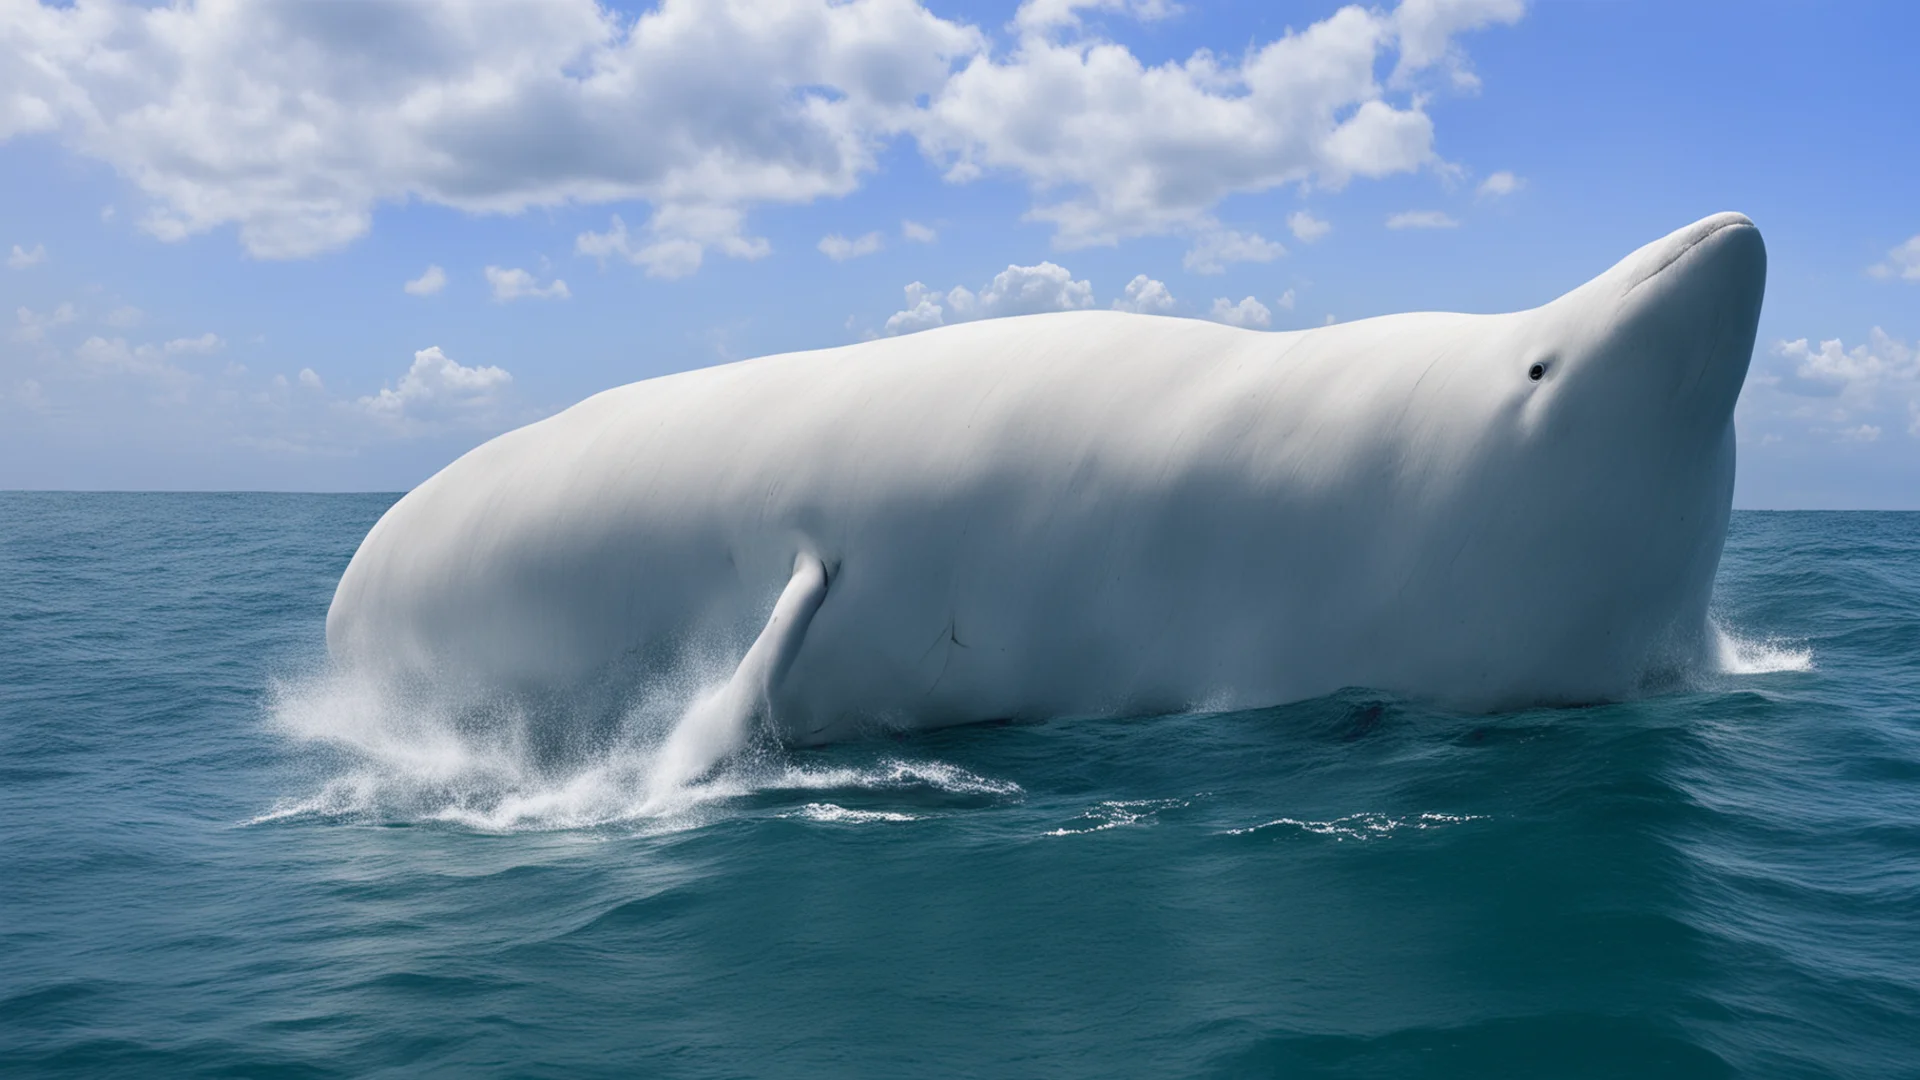 aiamazing a very big white sperm whale in the ocean  alongside a boat awesome portrait 2 wide